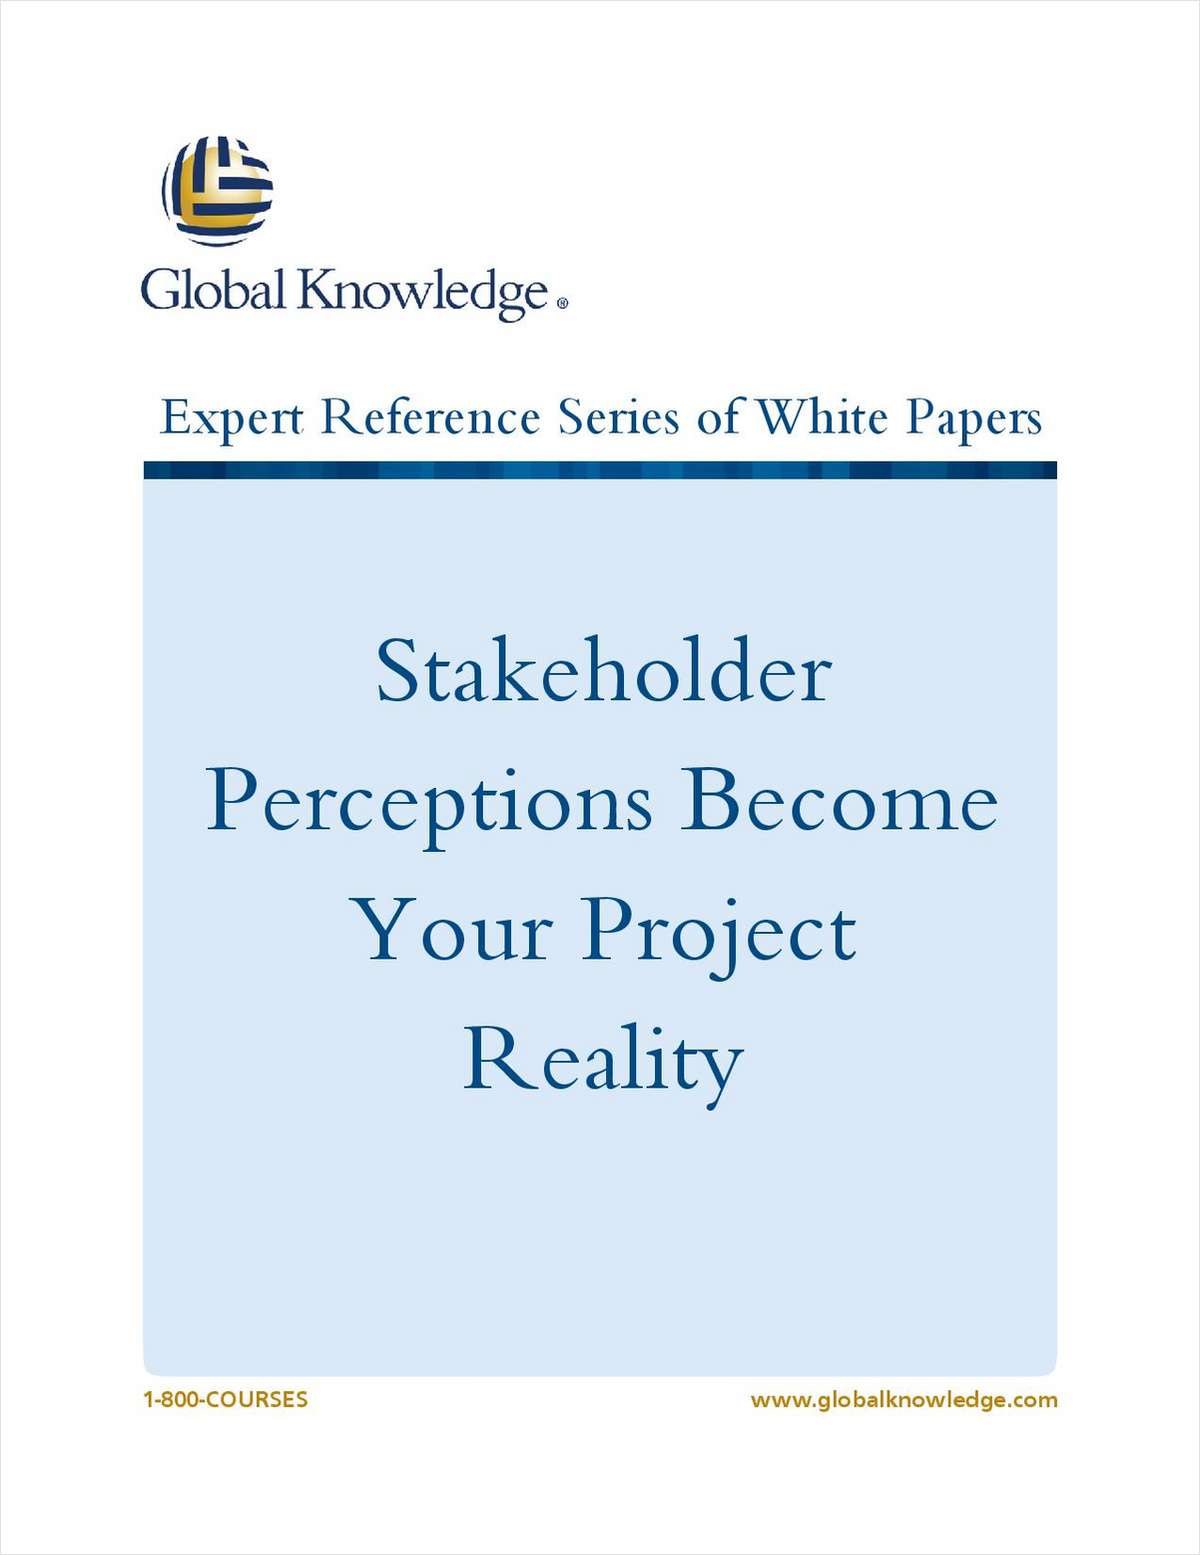 Stakeholder Perceptions Become Your Project Reality